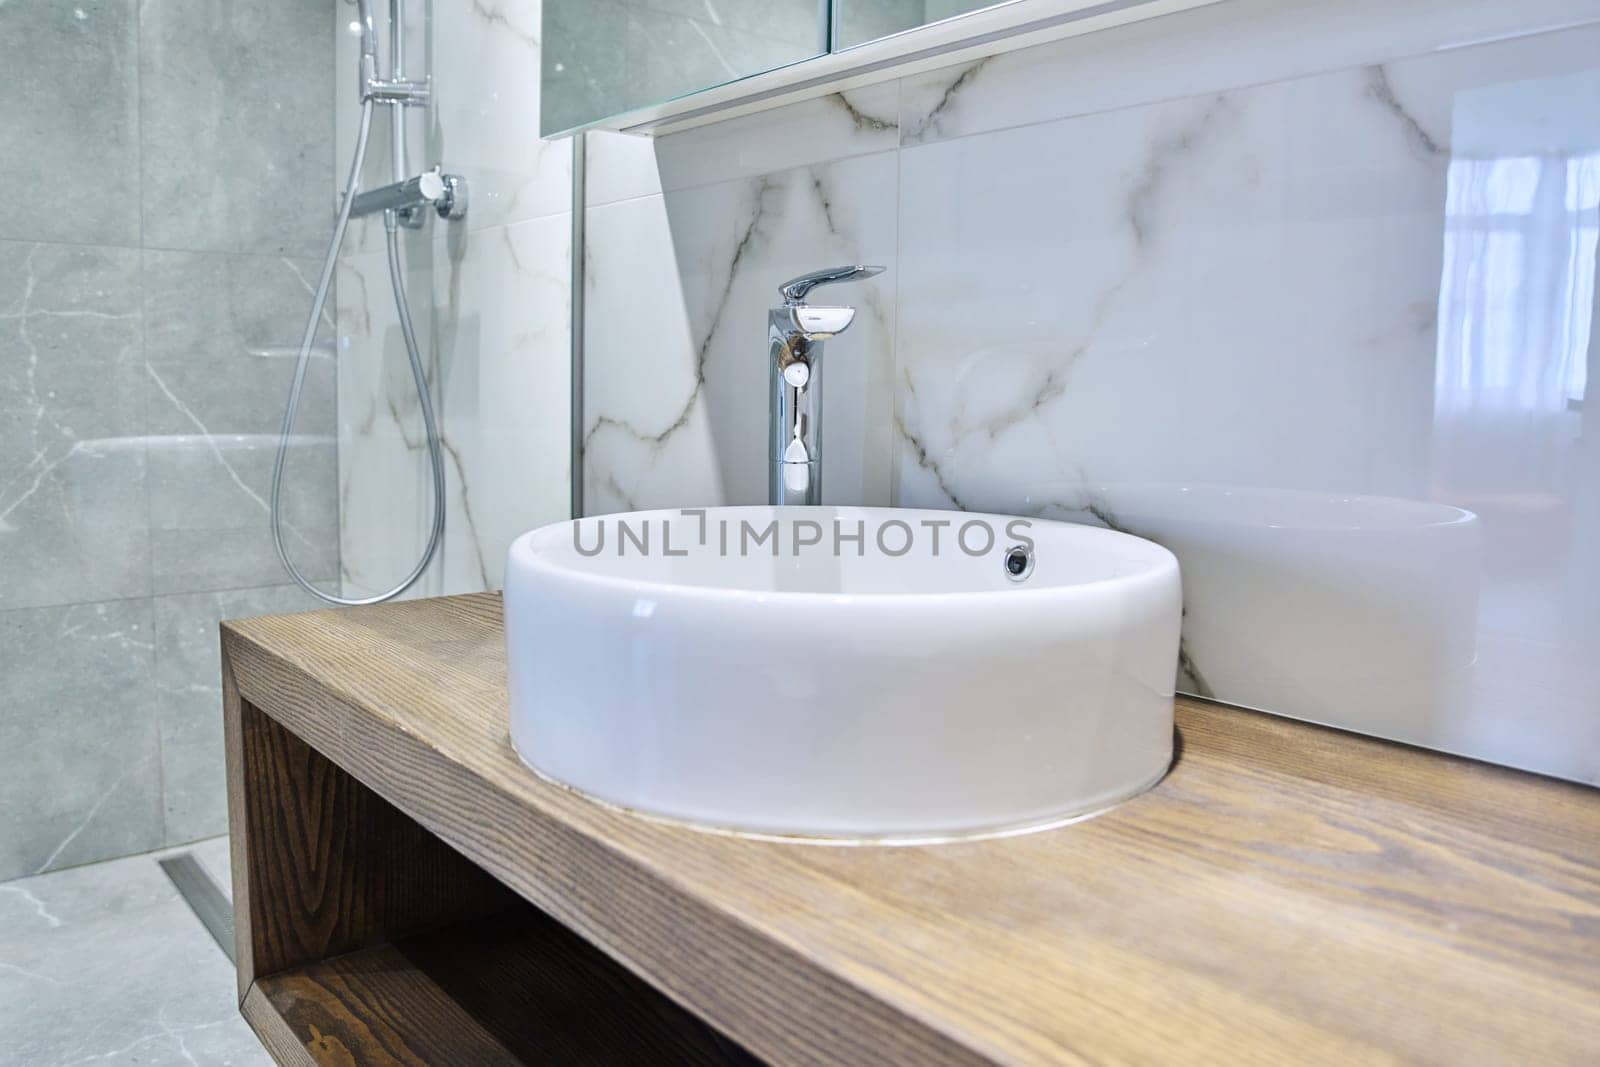 Shower room interior in marble white gray tiles, with countertop round washbasin on wooden bedside table. Modern minimalist style, bathroom cabinet, bathtub.